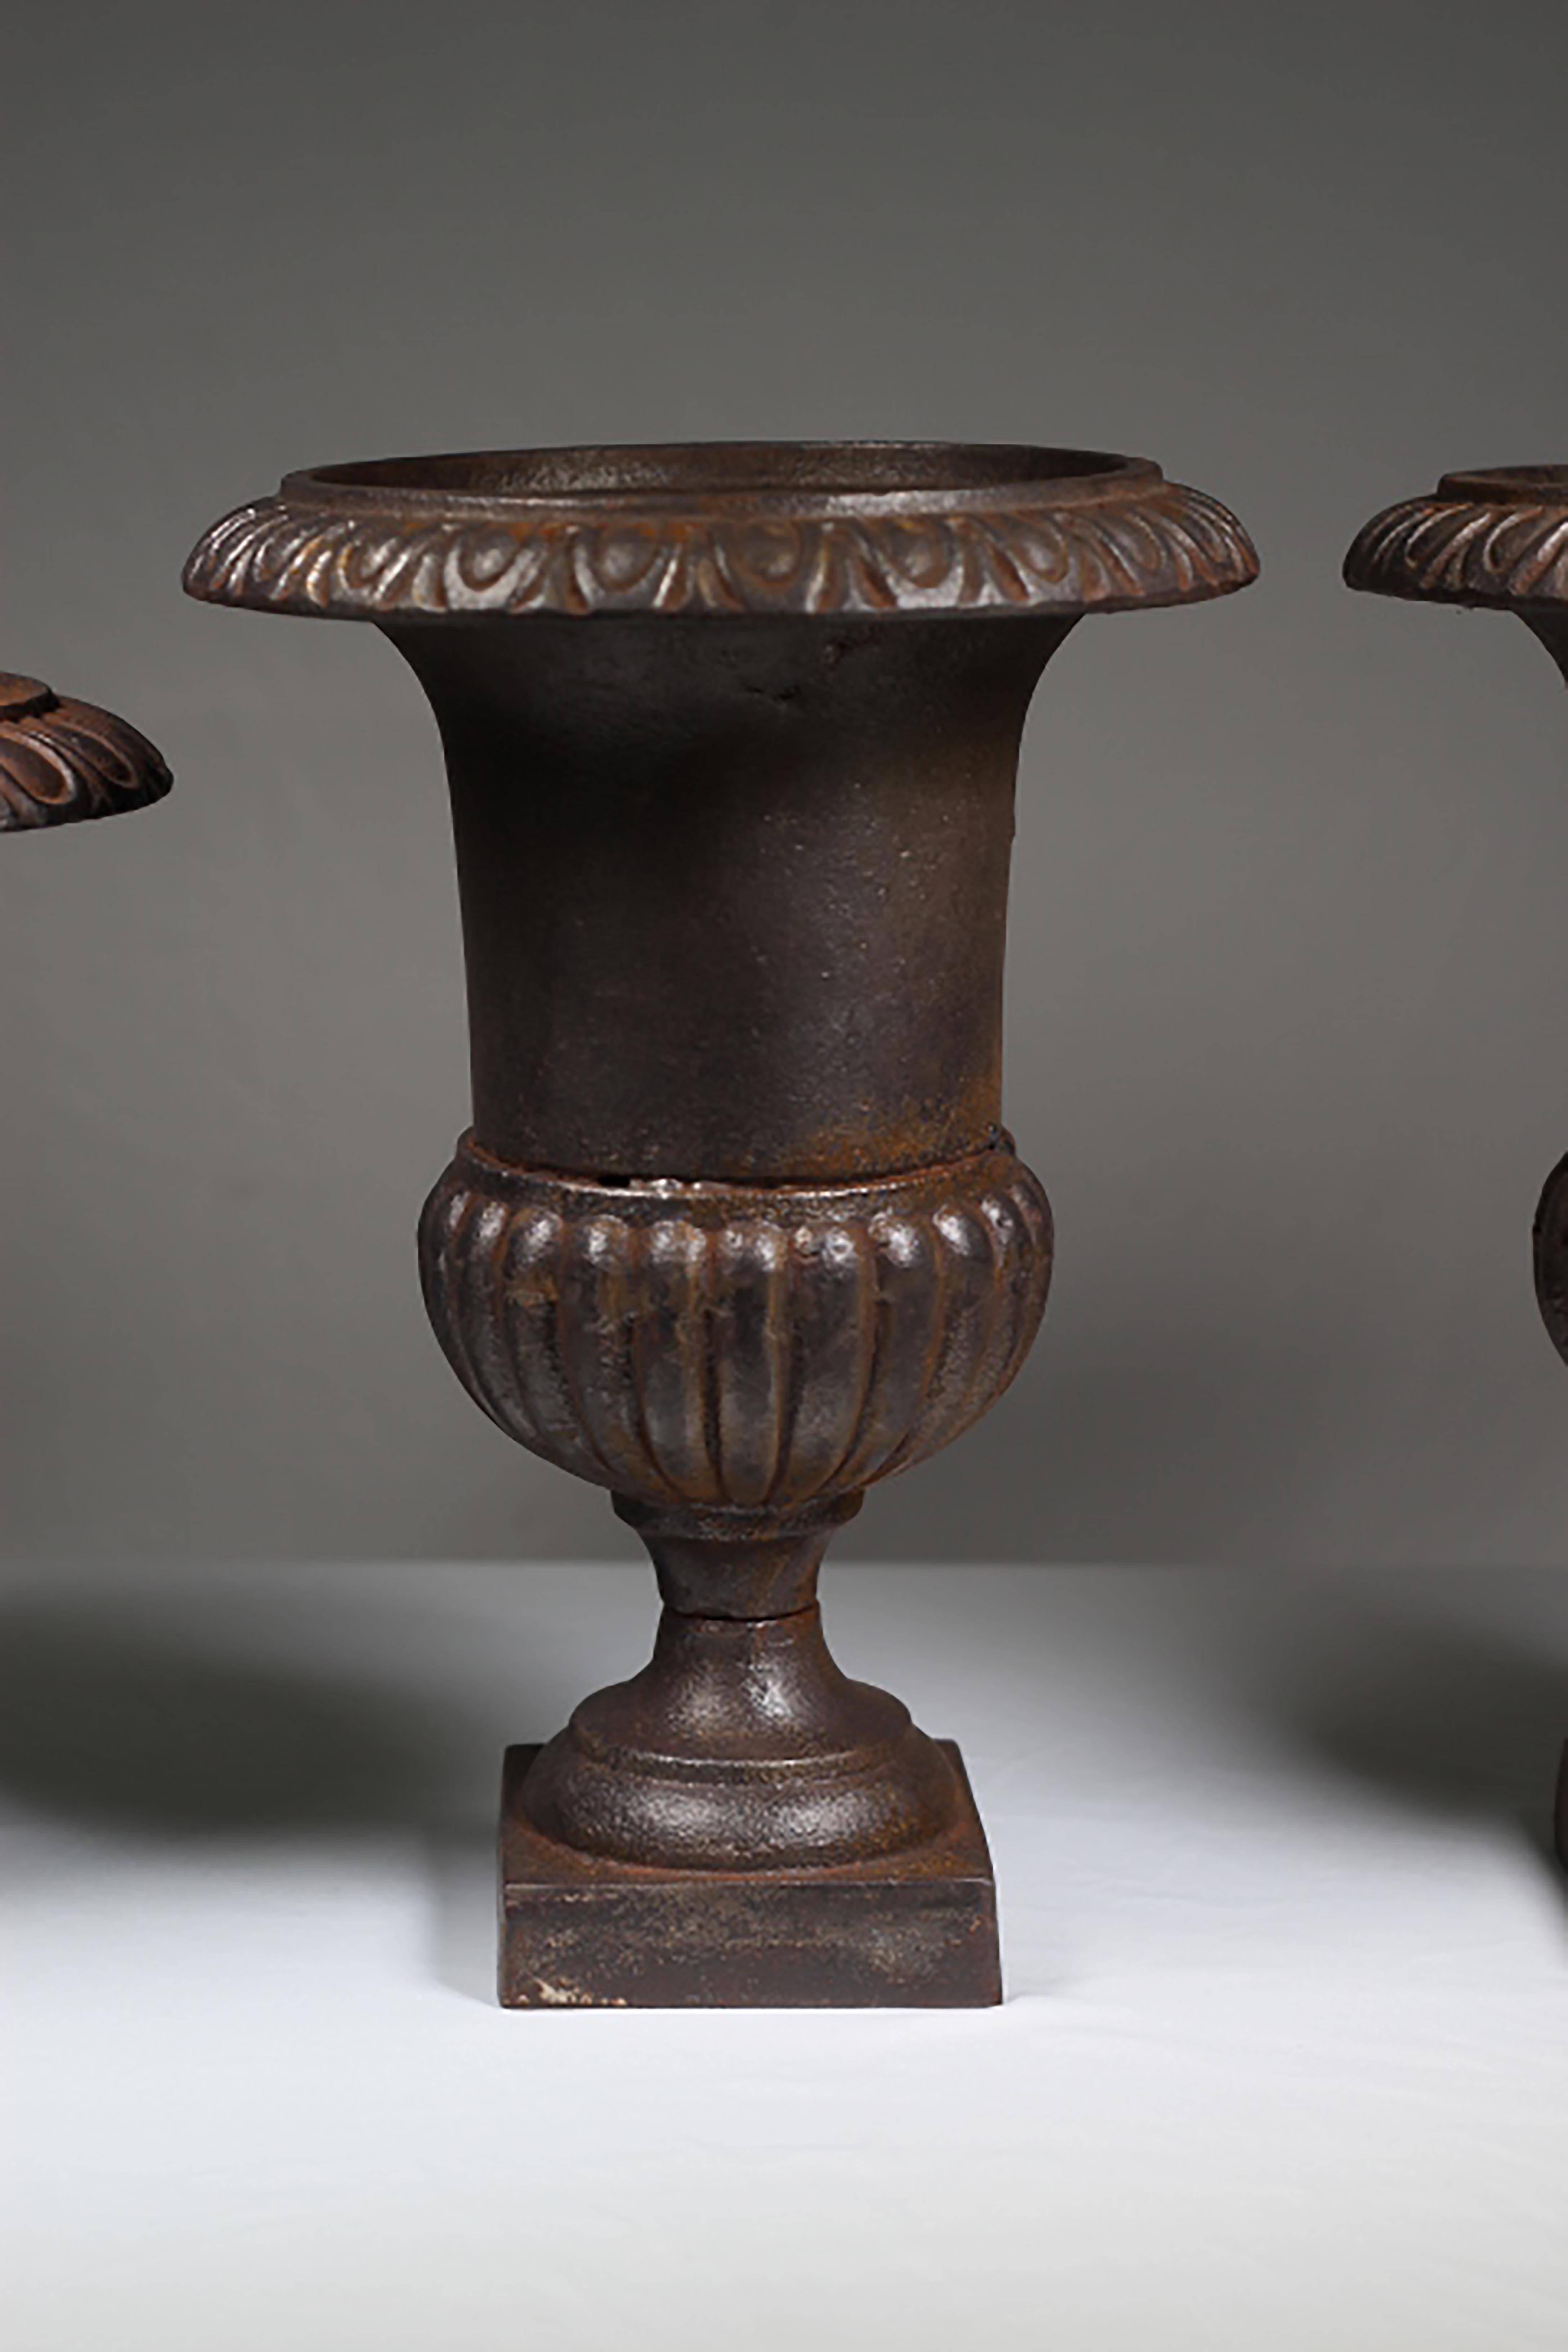 Vintage weathered cast iron urns on pedestal bases. Very substantial in weight. Good vintage condition with age appropriate patina.